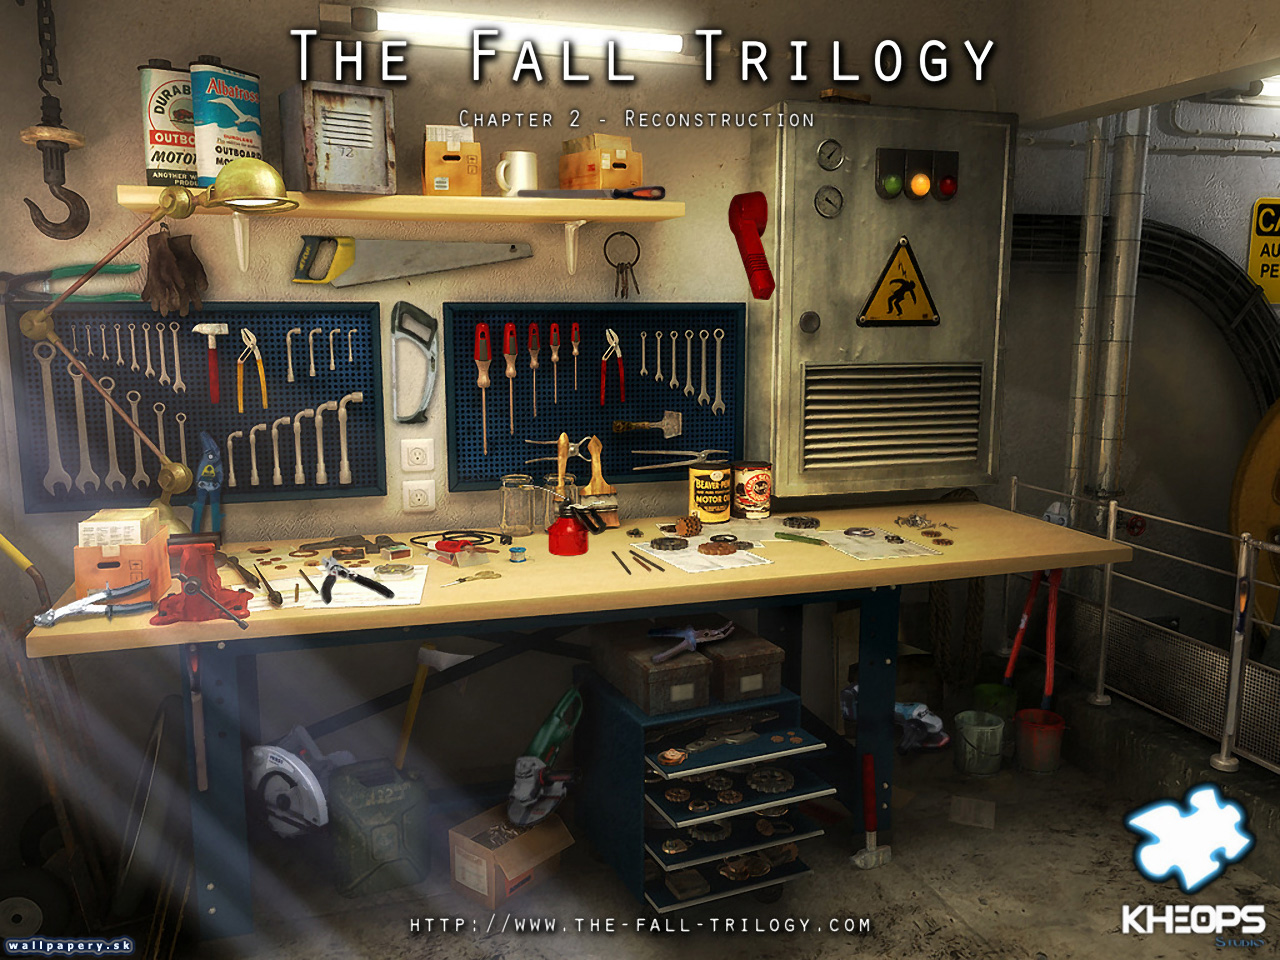 The Fall Trilogy - Chapter 2: Reconstruction - wallpaper 7